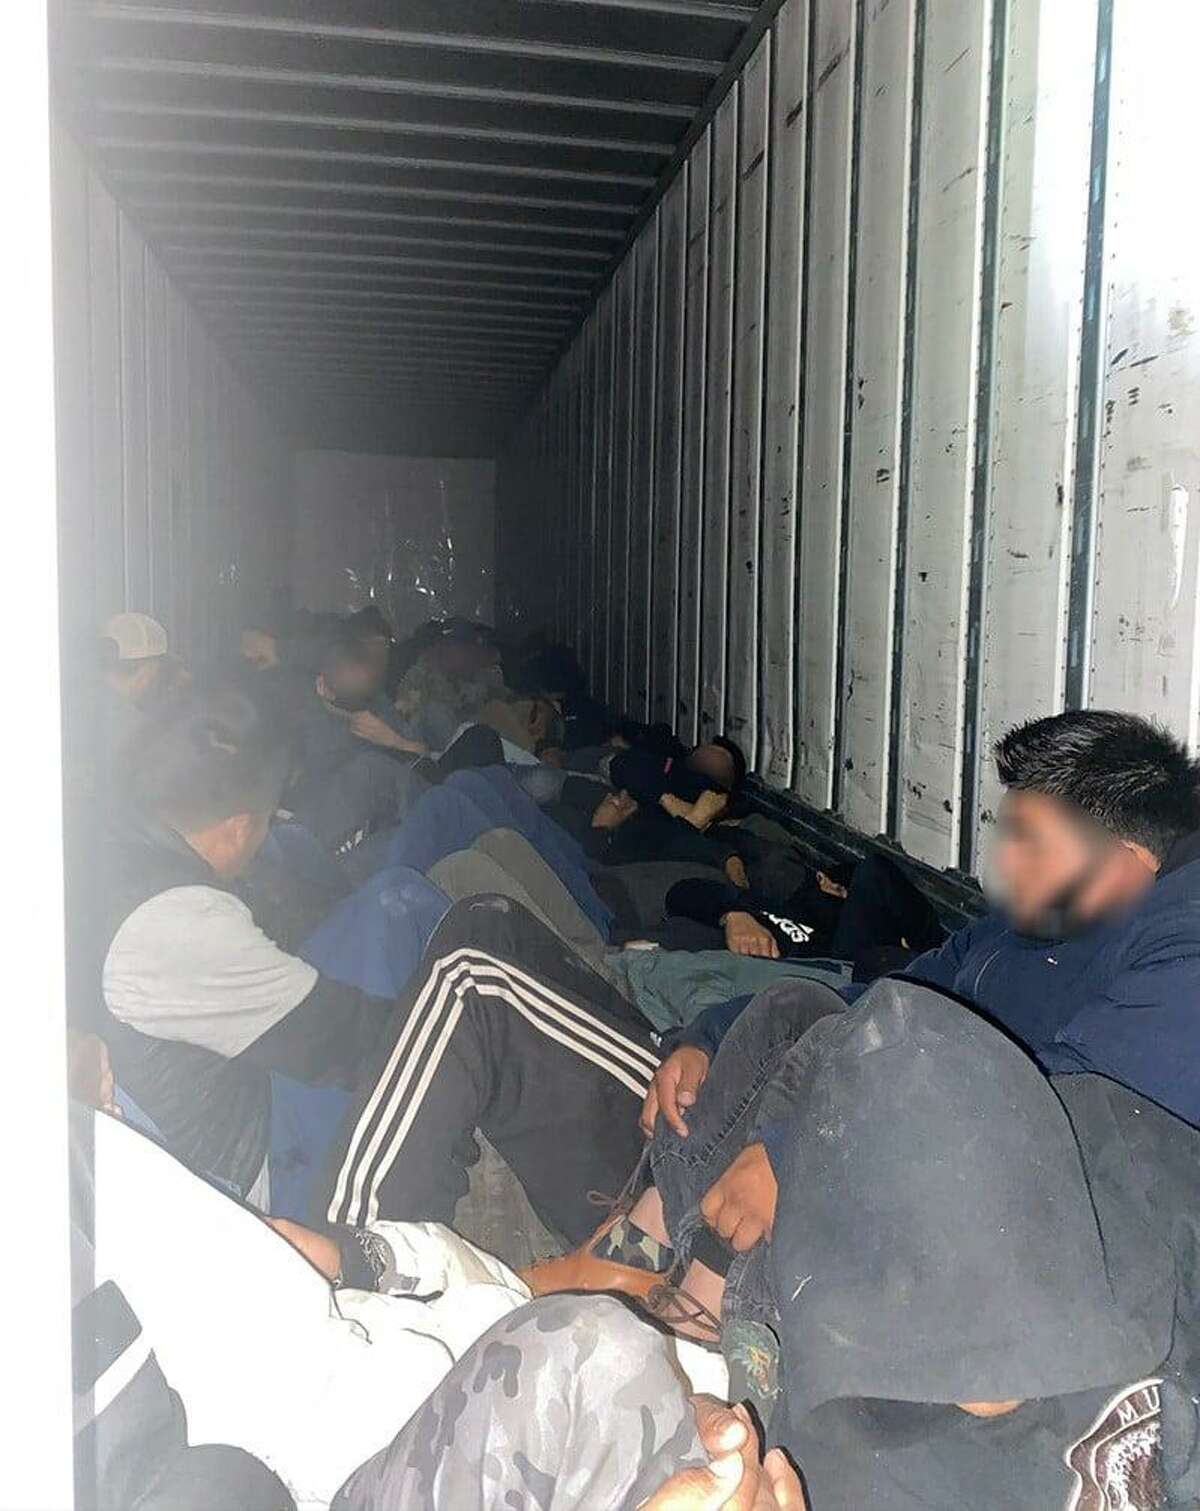 U.S. Border Patrol agents discovered 106 people during a smuggling attempt reported on Feb. 3 at the Interstate 35 checkpoint. All were immigrants who were in the country illegally.